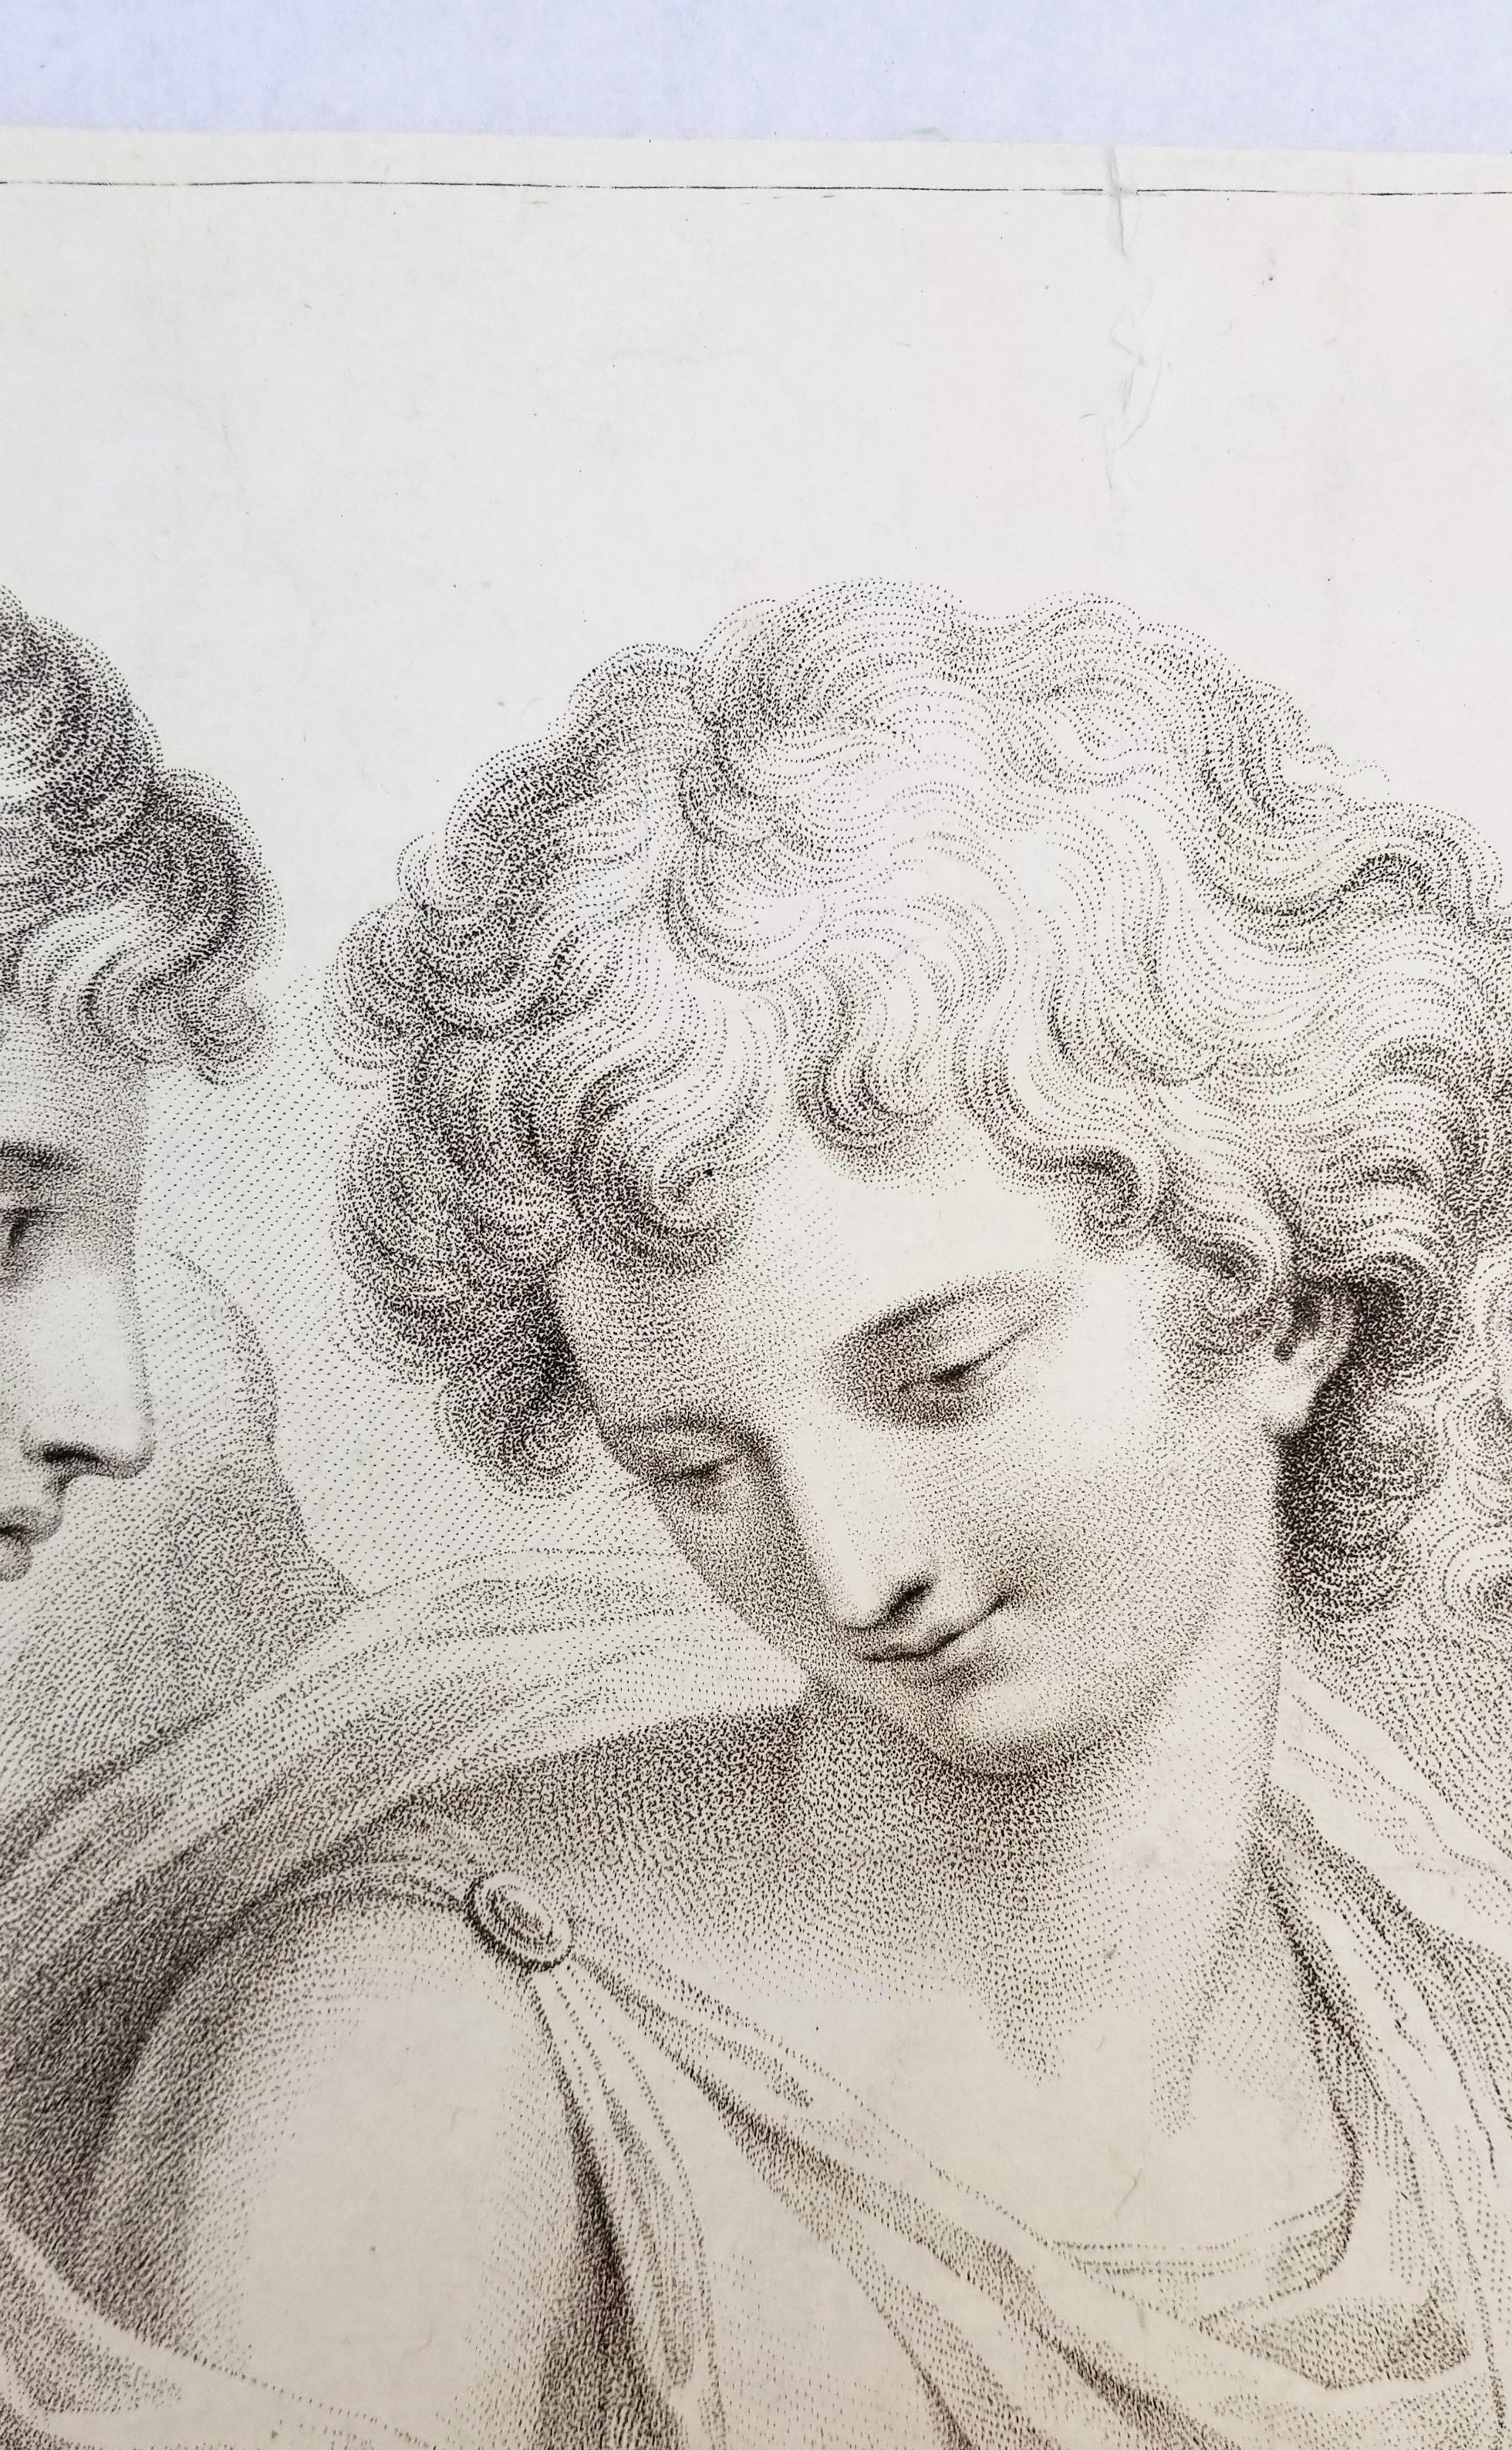 Set of Two Engravings after Cipriani 